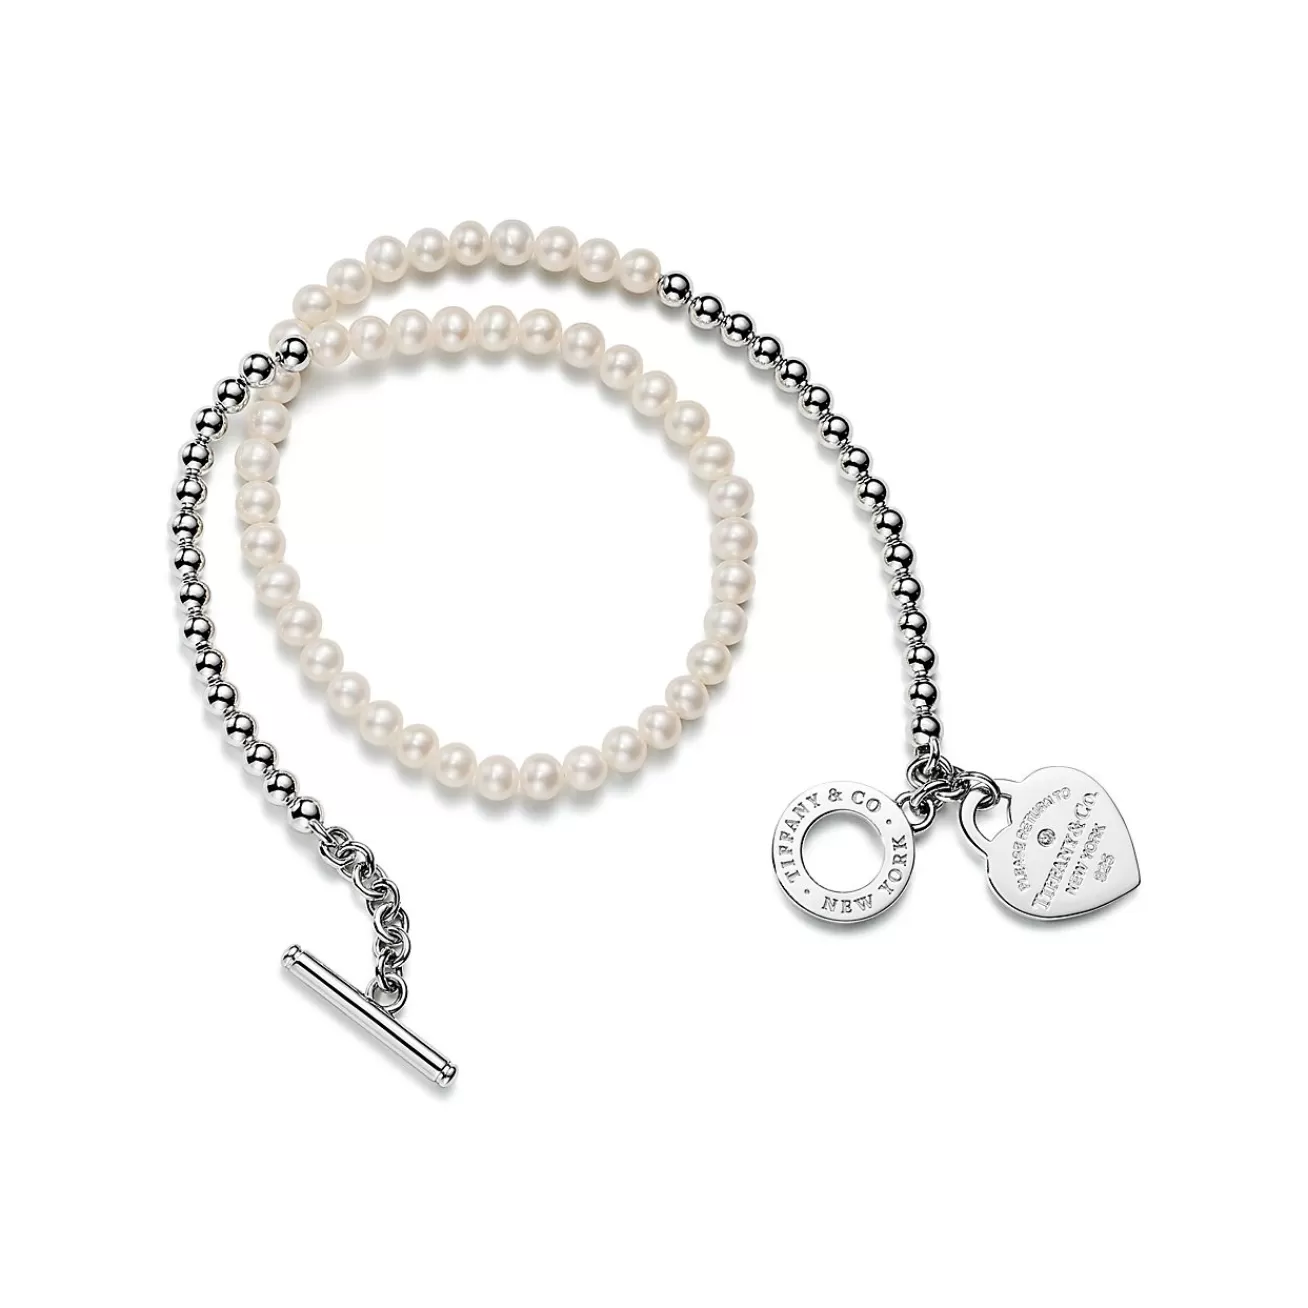 Tiffany & Co. Return to Tiffany® Wrap Bead Bracelet in Silver with Pearls and a Diamond, Small | ^ Bracelets | Gifts for Her